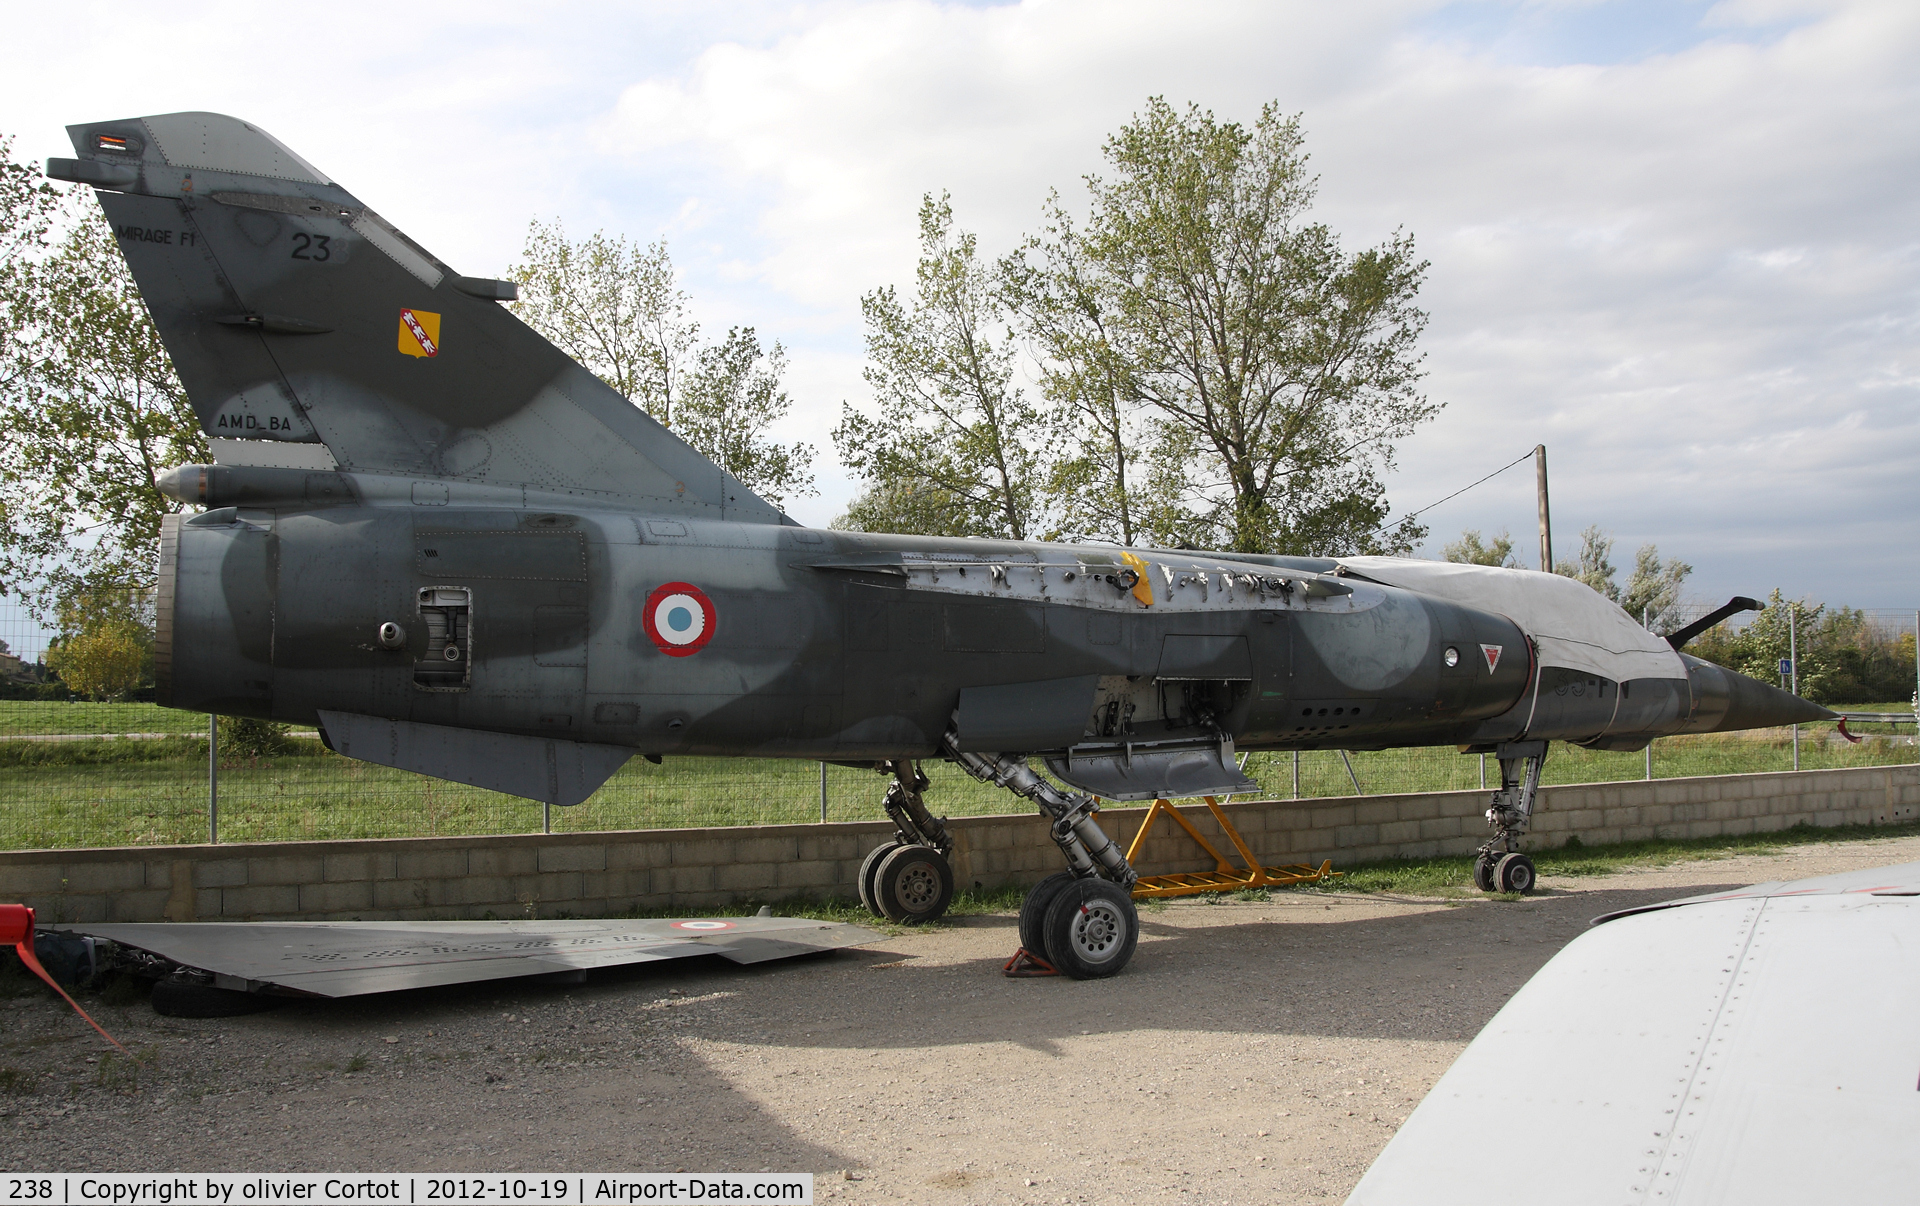 238, Dassault Mirage F.1CT C/N 238, recently retired from active duty, now part of the Musée aéronautique d'Orange, France